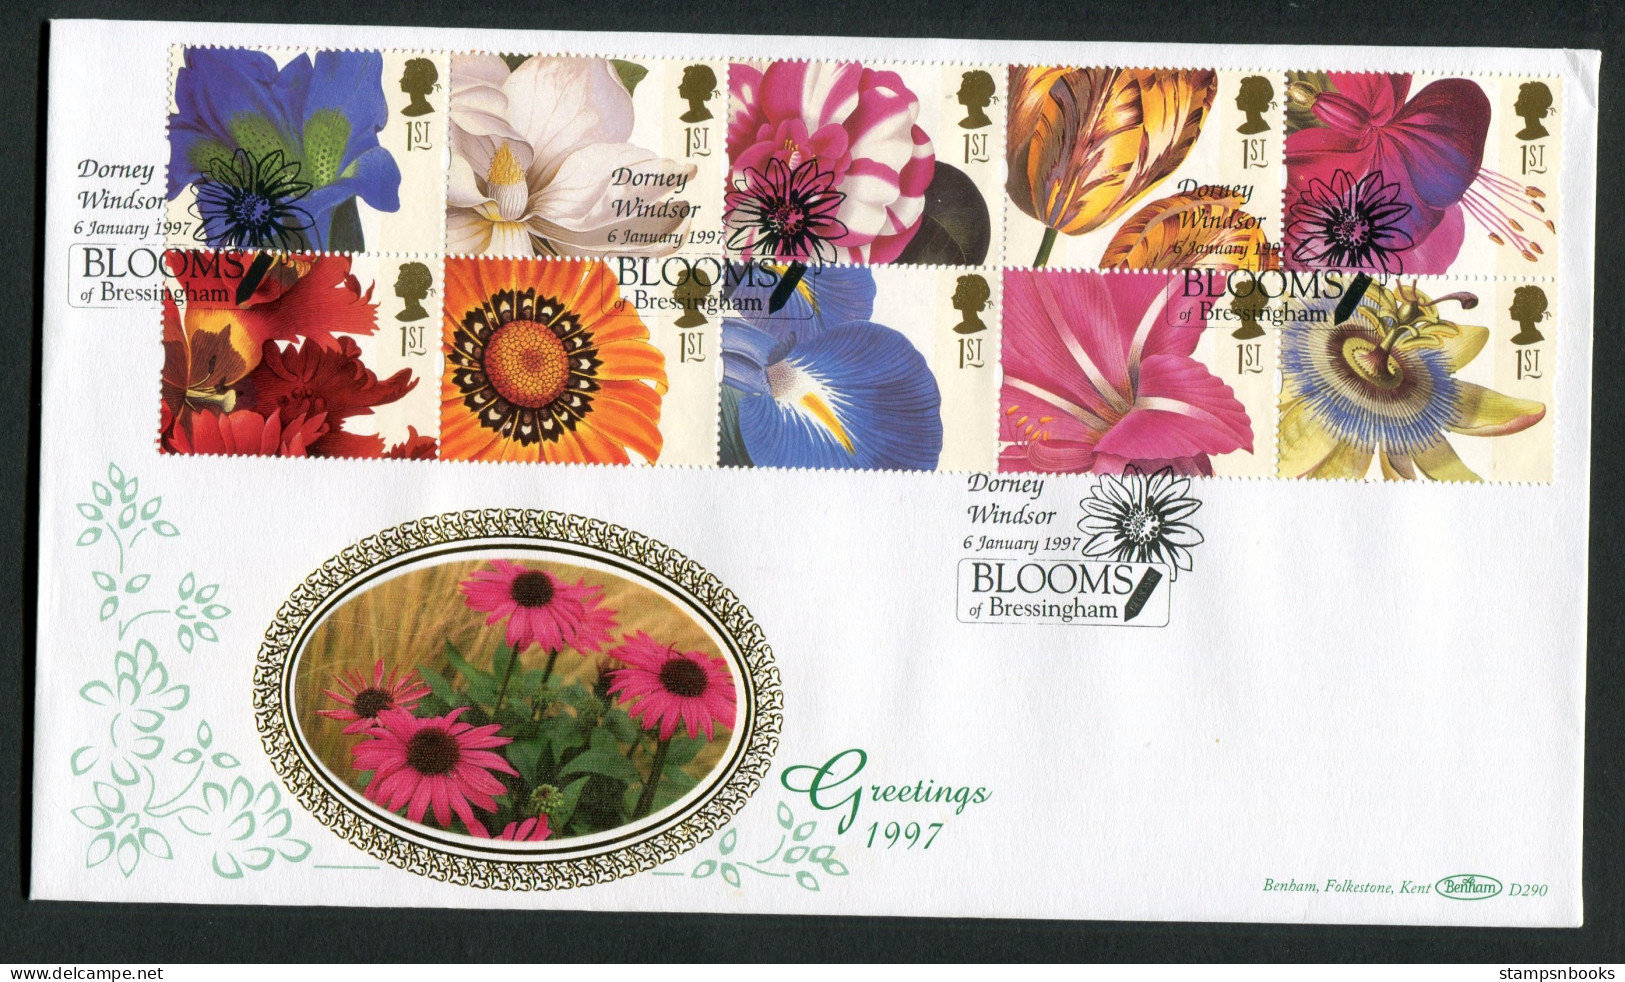 1997 GB Flowers Greeting Stamps First Day Cover, Dorney Windsor Blooms Of Bressingham Benham D290 FDC - 1991-2000 Decimal Issues